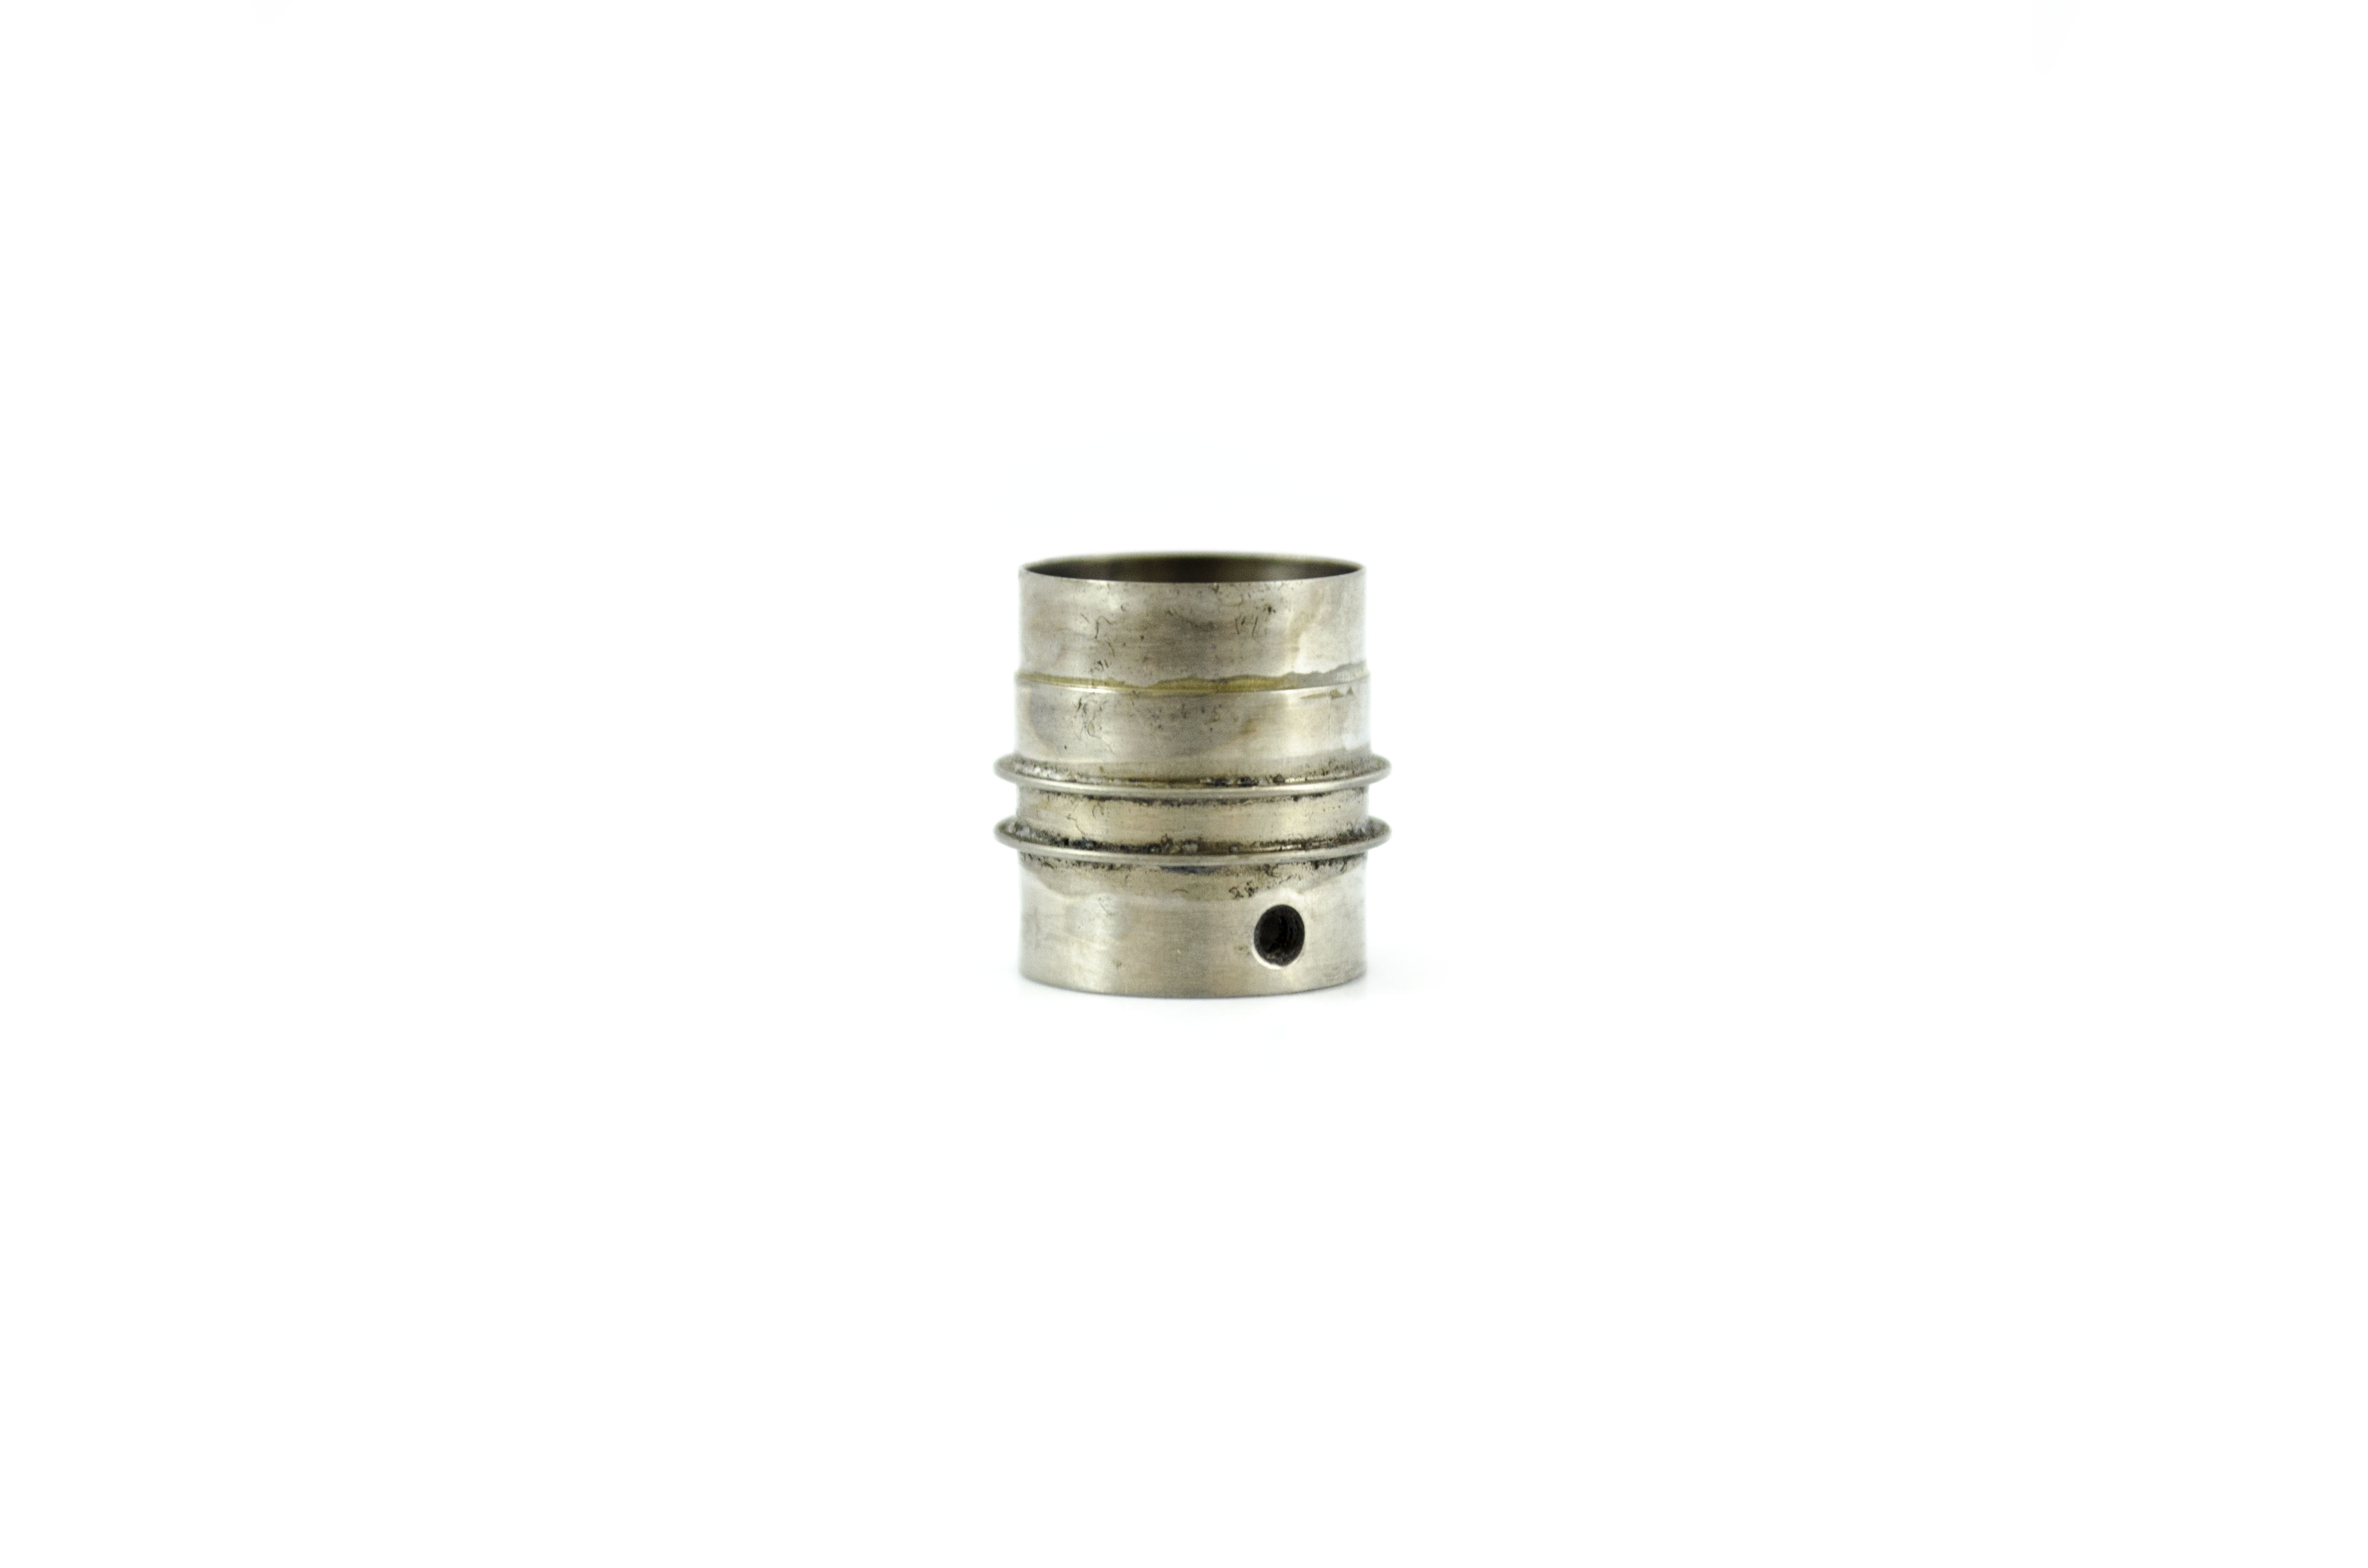 OEM Insertion Tube Proximal End Fitting - GIF-P20, GIF-PQ20